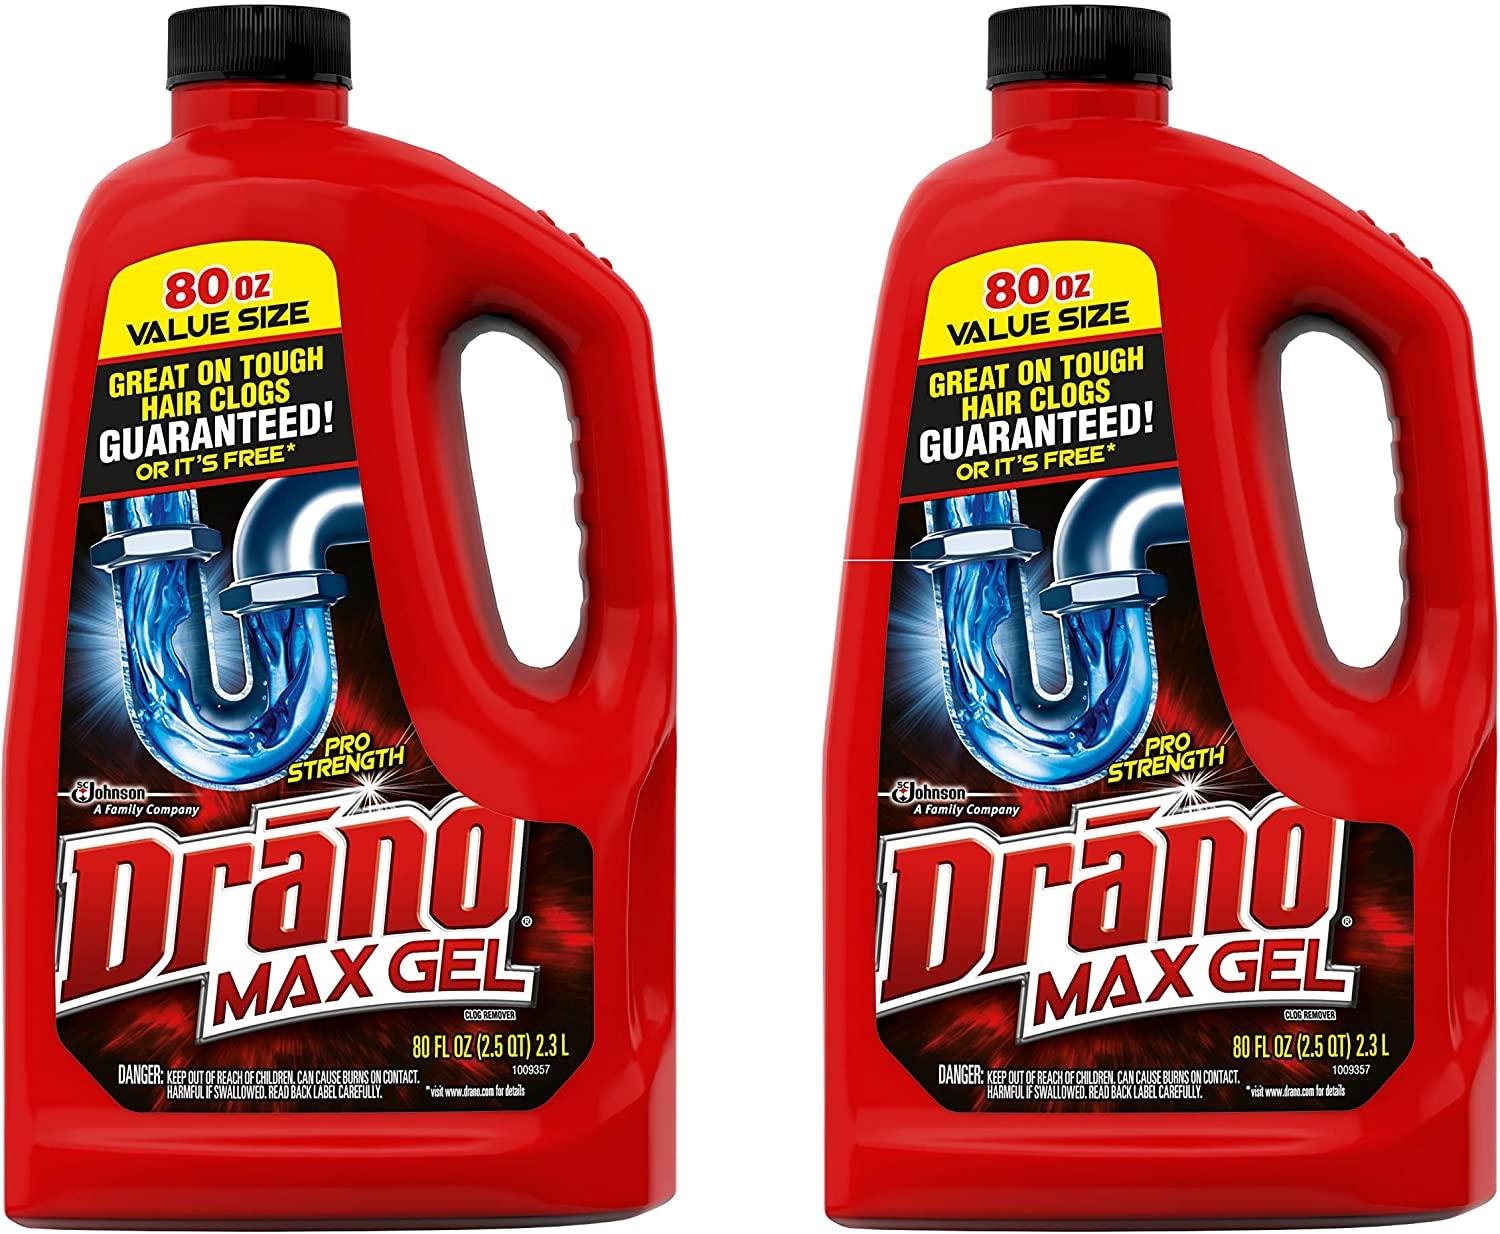 2-Count 80oz Drano Max Gel Clog Remover for $9.70 Shipped